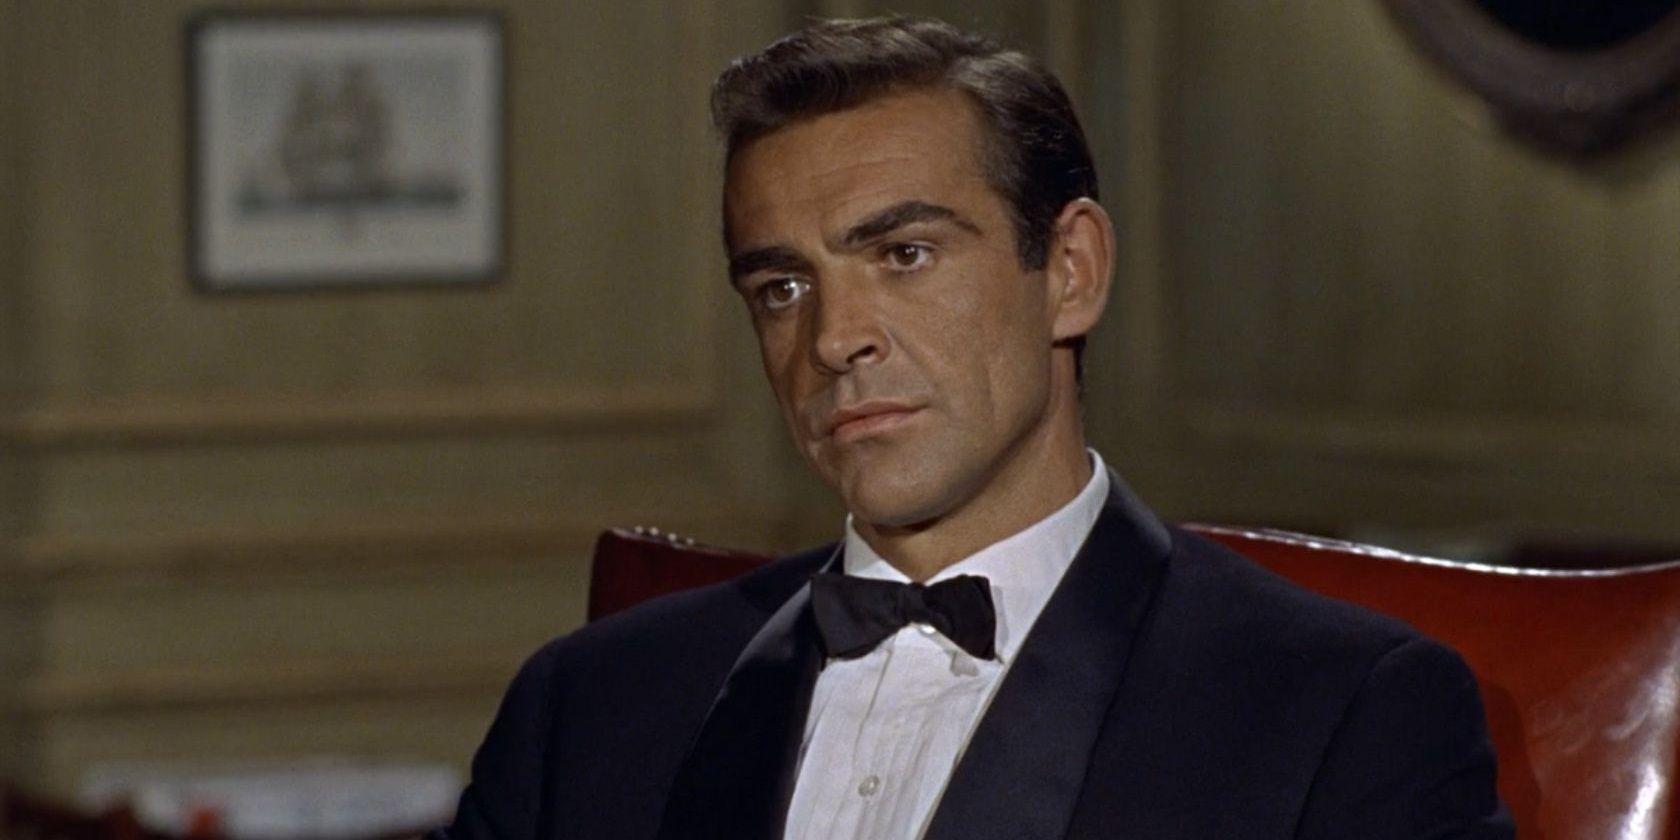 Sean Connery as Bond in Dr No